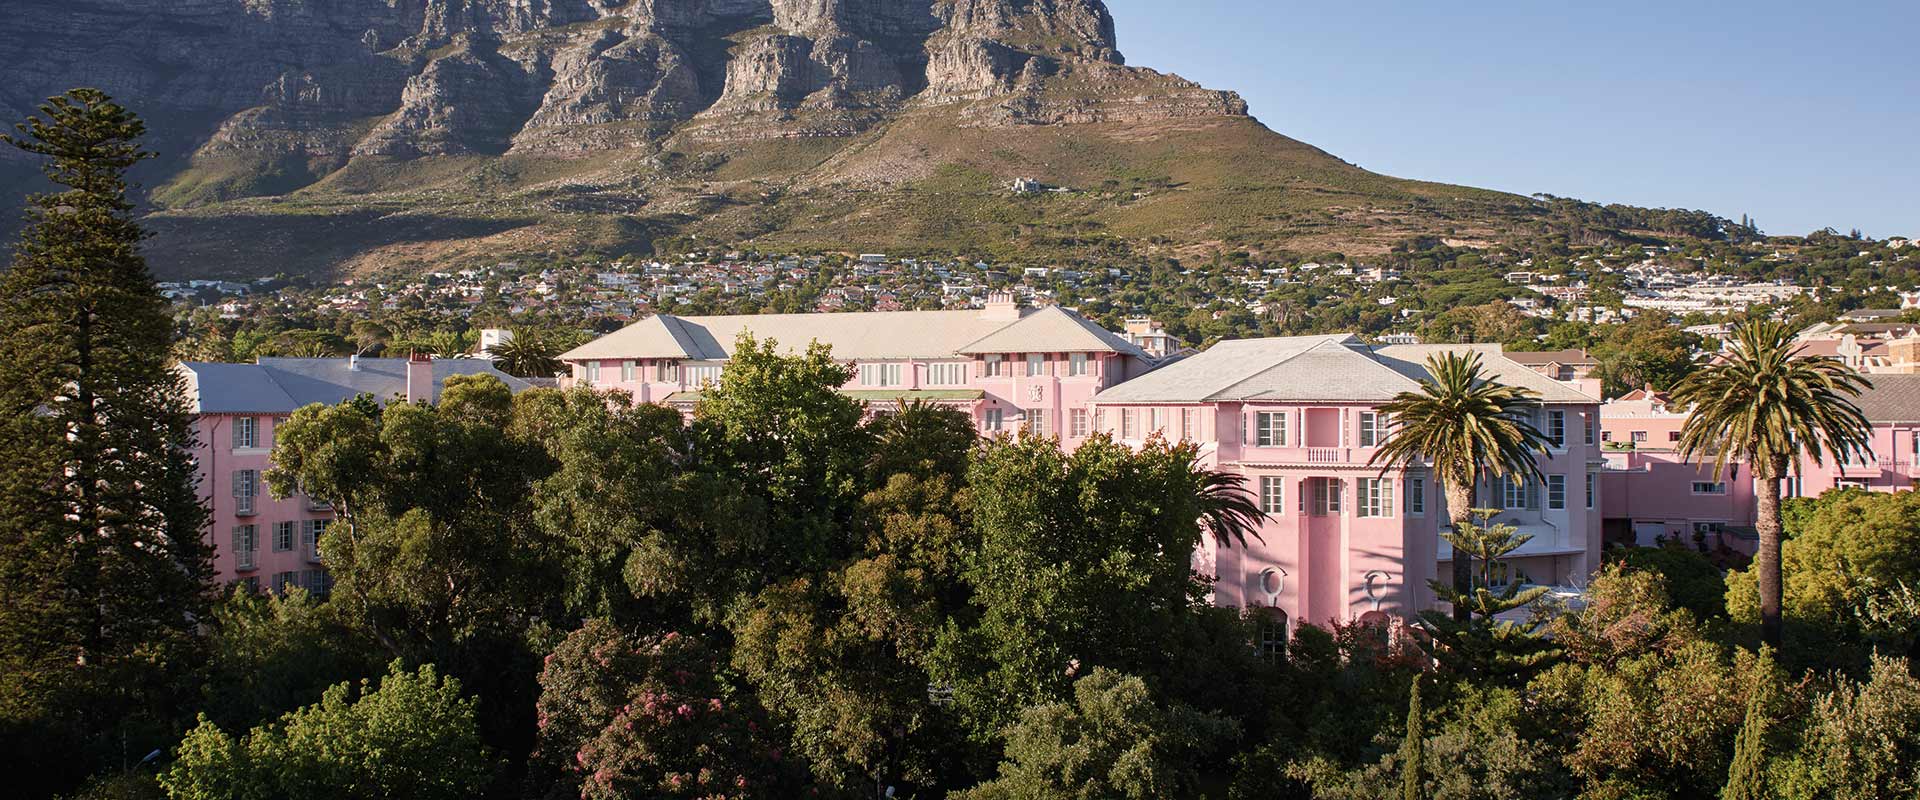 Panorama Belmond Mount Nelson hotel Cape Town, South Africa